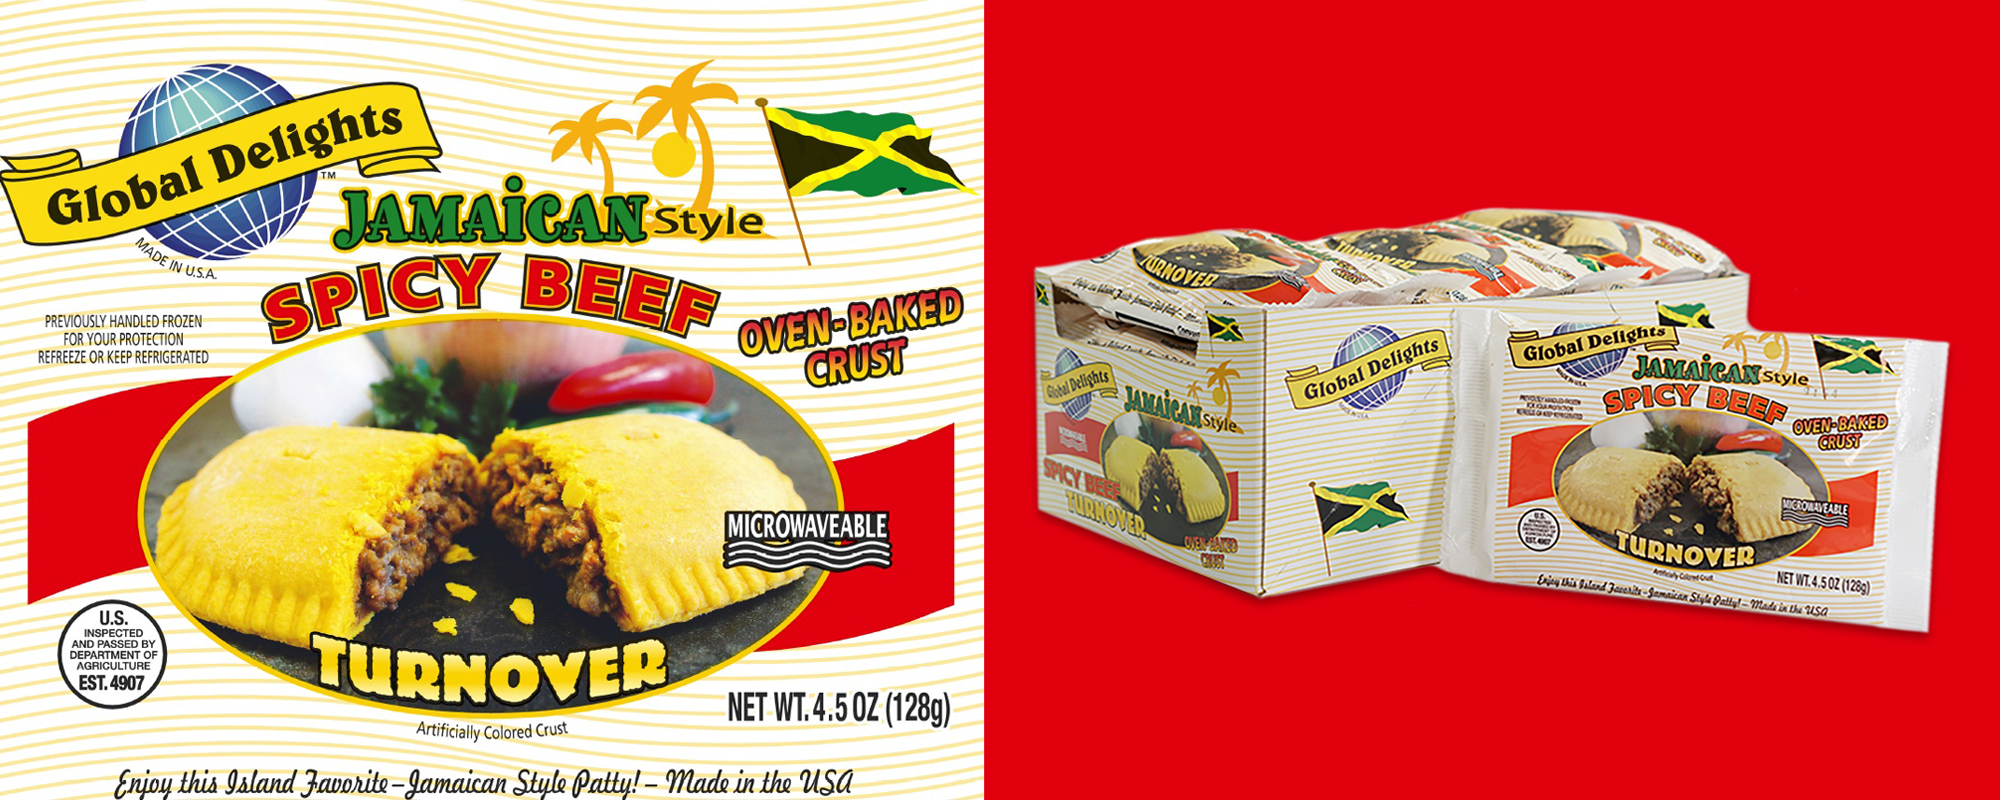 Jamaican Style Spicy Beef Turnover - Caribbean Products